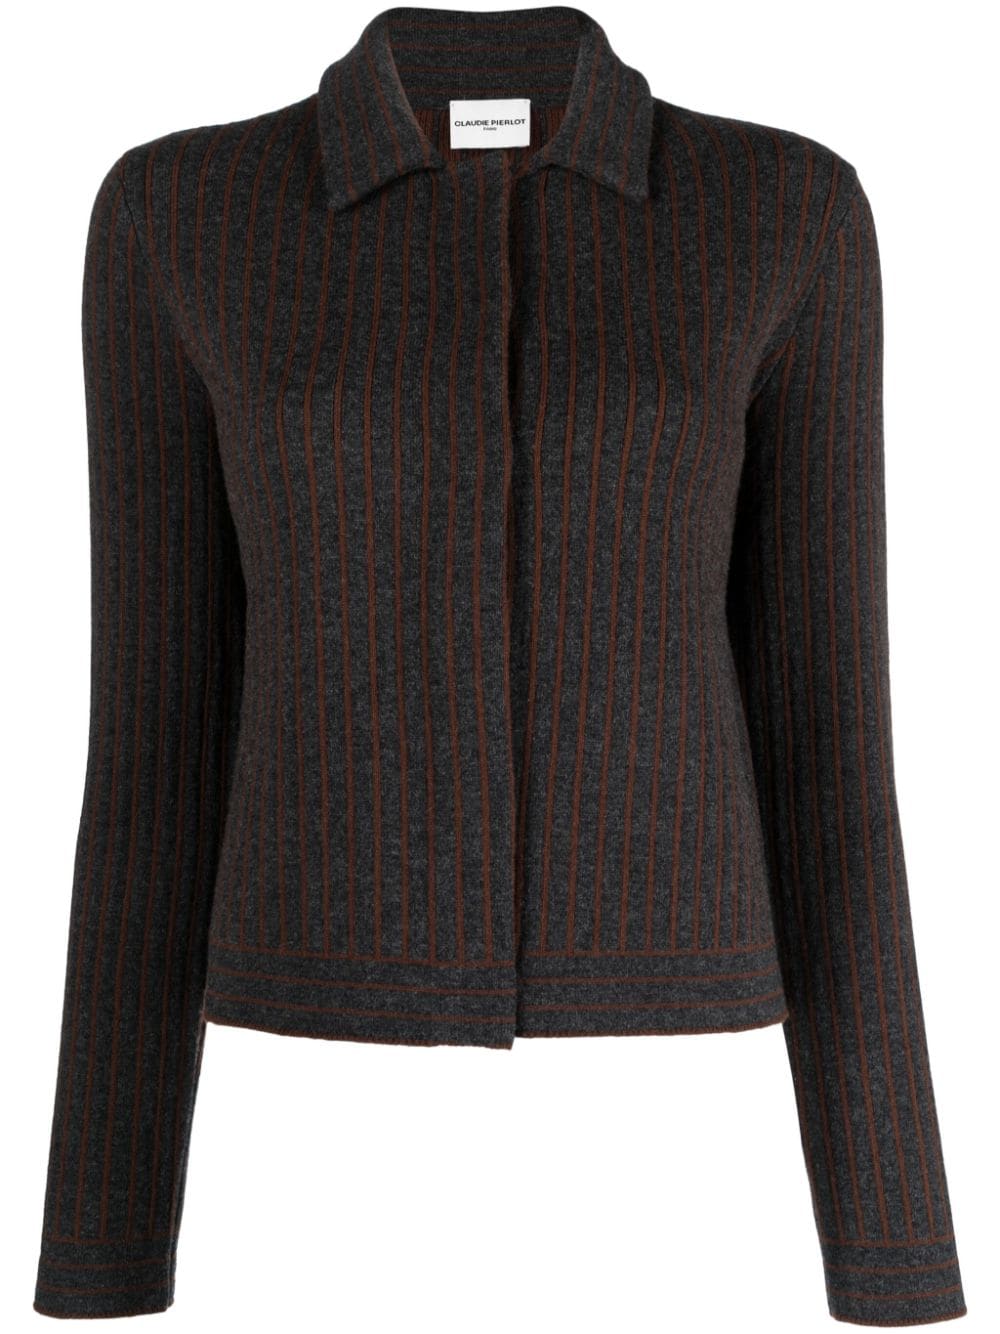 Image 1 of Claudie Pierlot two-tone striped knitted cardigan